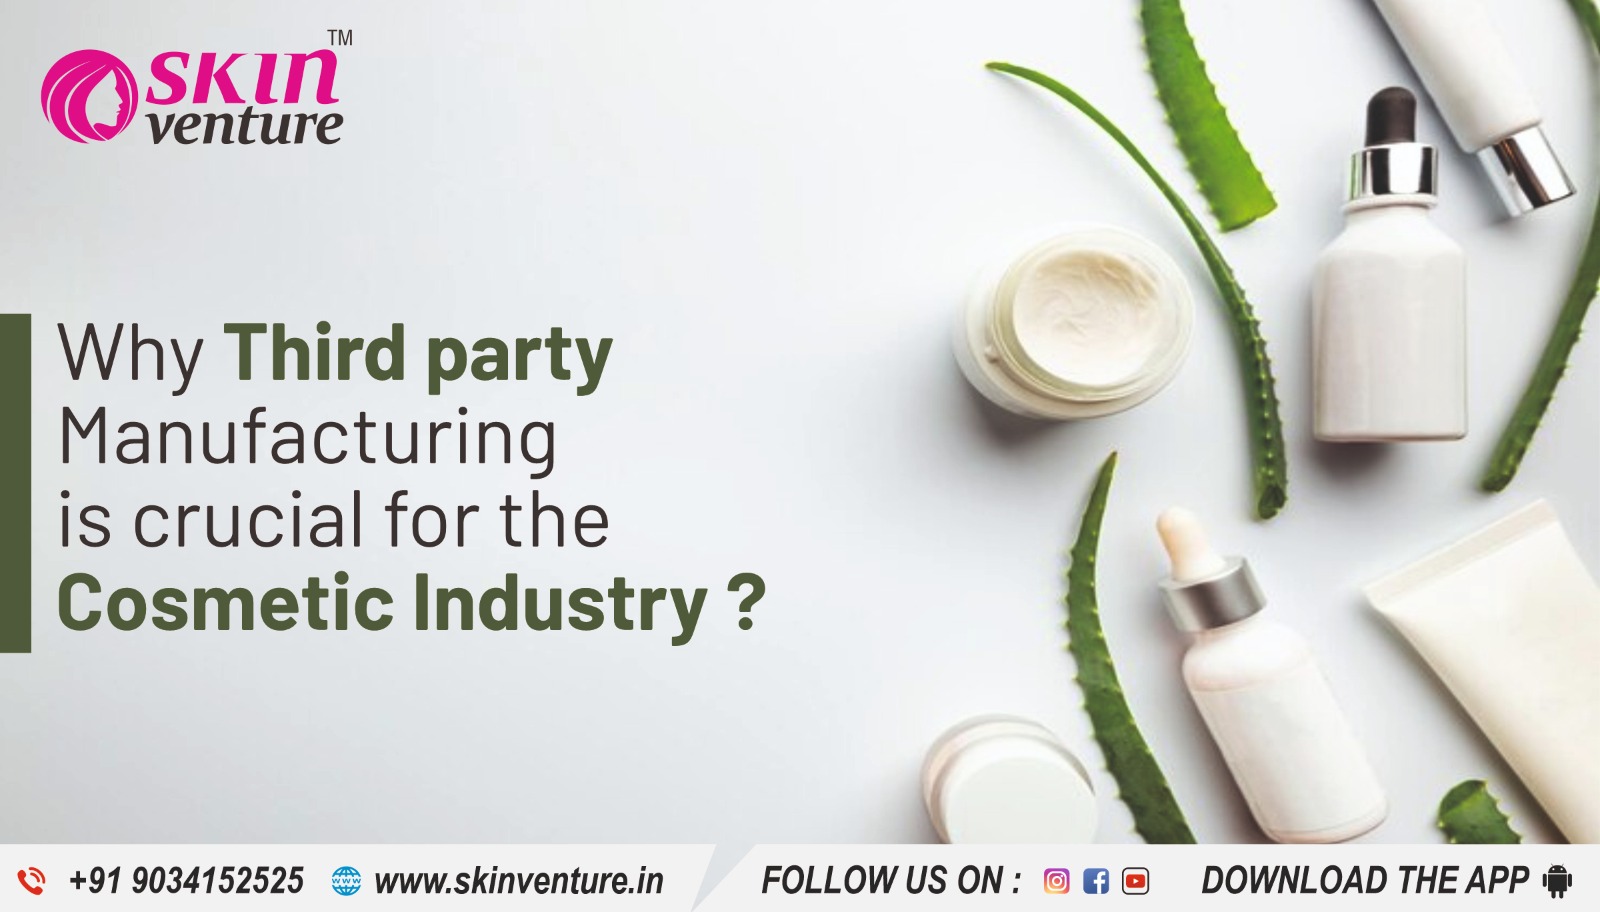 Why Third Party Manufacturing is Crucial for the Cosmetic Industry?